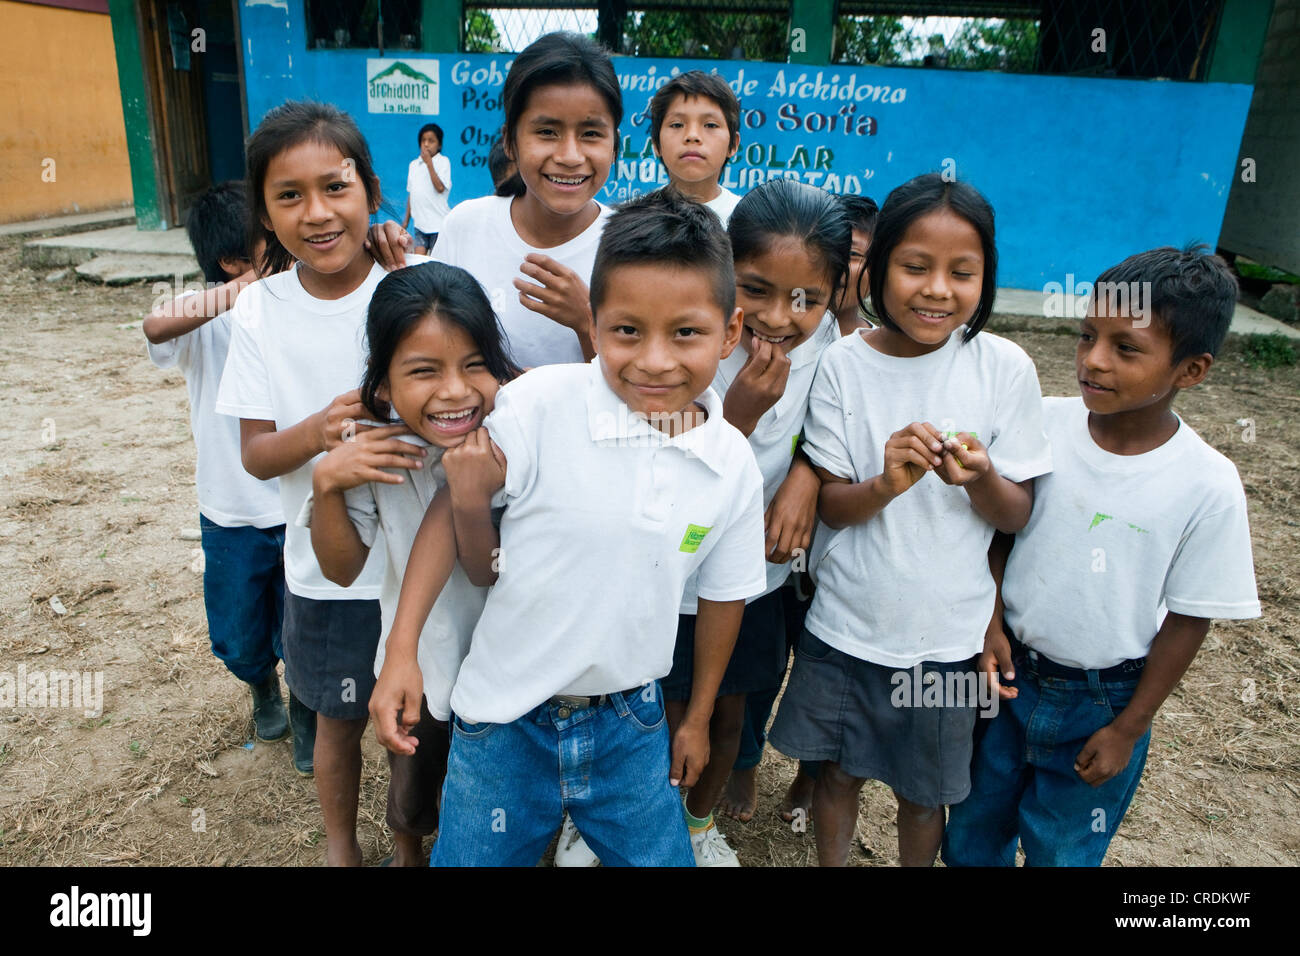 Smiling children in the playground of an elementary school in the rainforest village of Nueva Libertad, Ecuador, South America Stock Photo